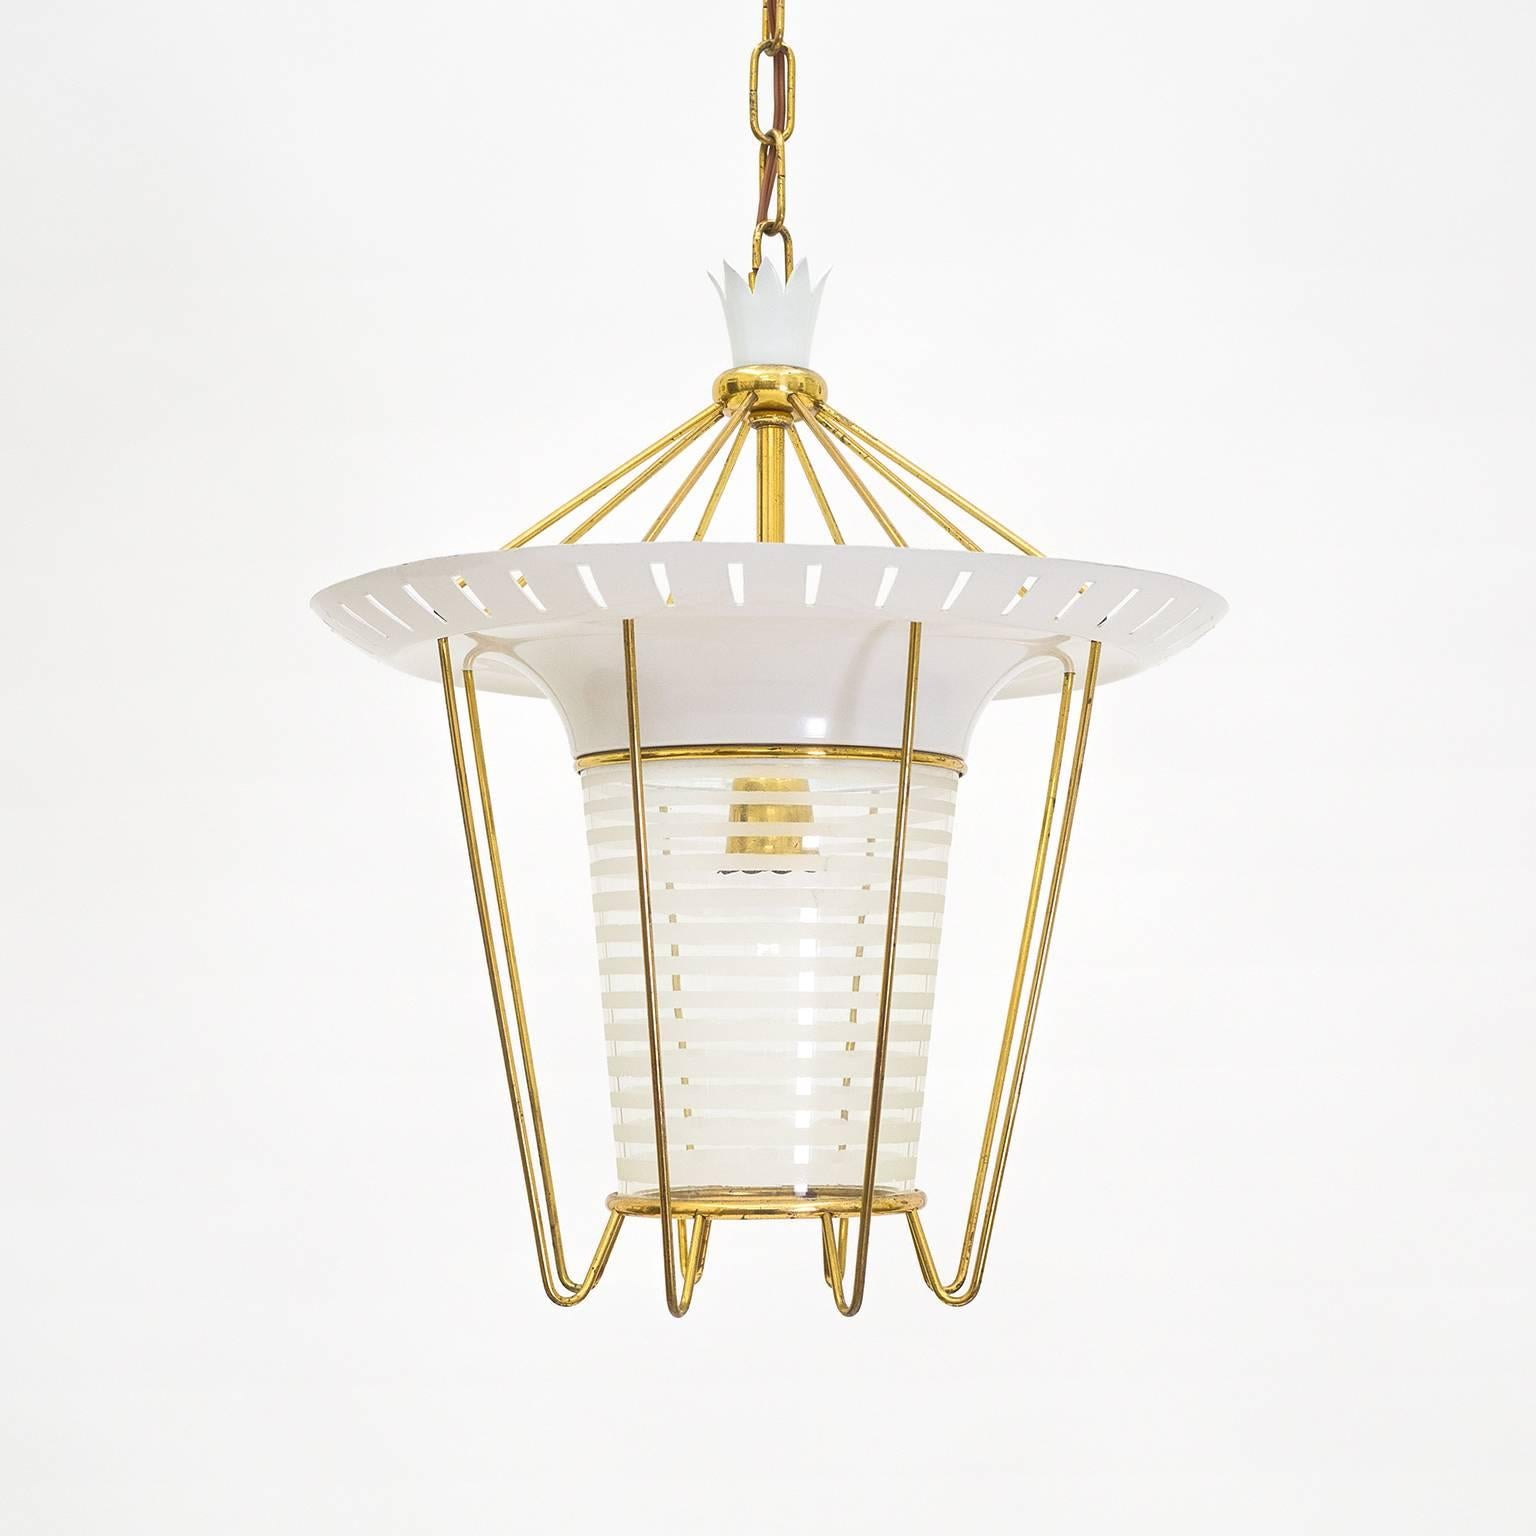 Frosted Italian 1950s Lantern in Brass, Glass and Lacquered Aluminum